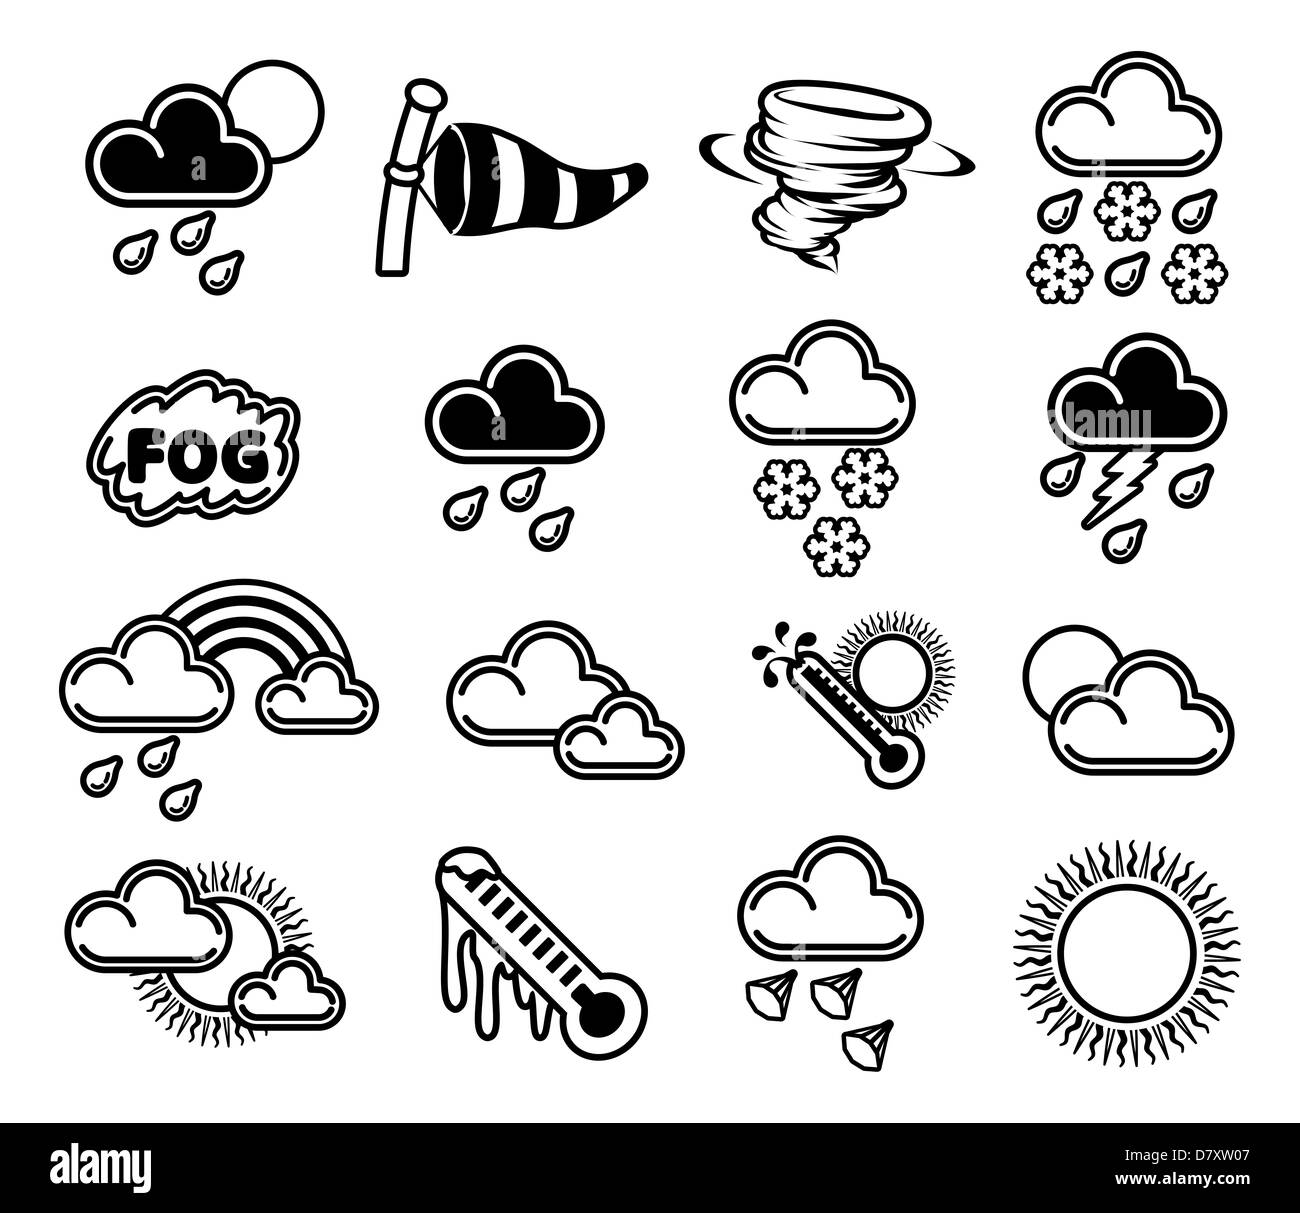 A set of monochrome weather icons like those used in forecasts Stock Photo